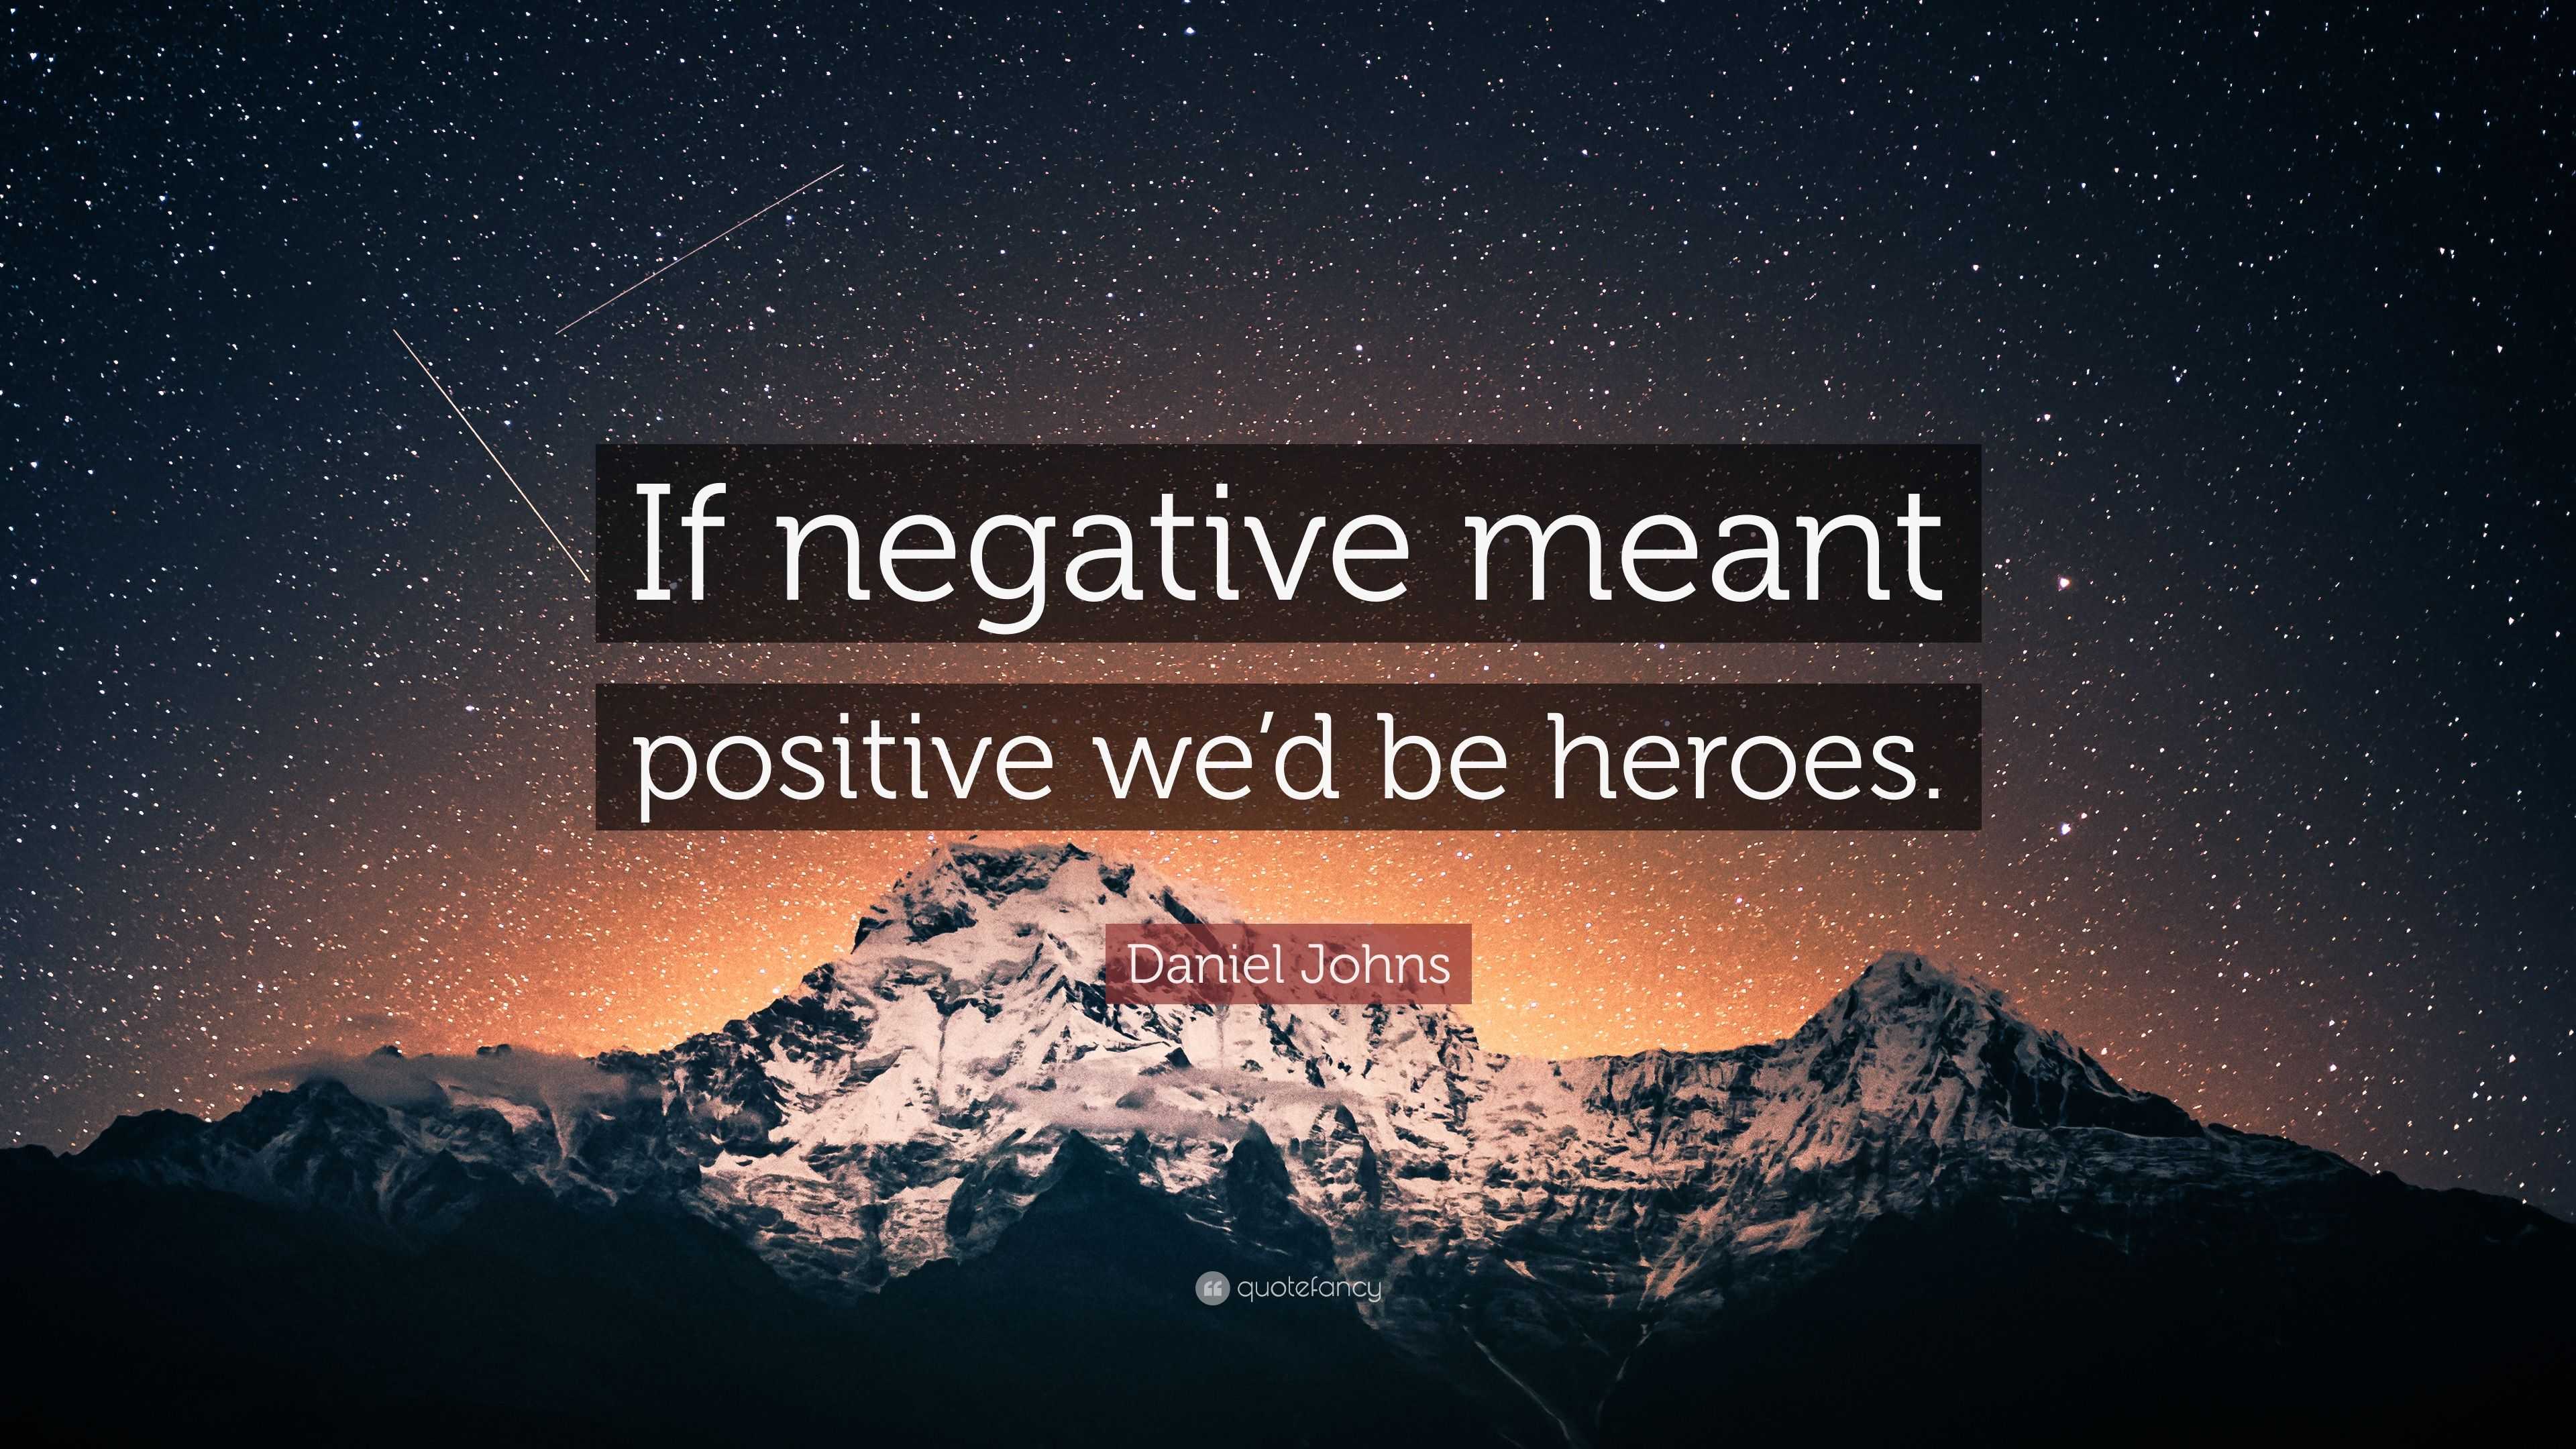 Daniel Johns Quote: “If negative meant positive we’d be heroes.”